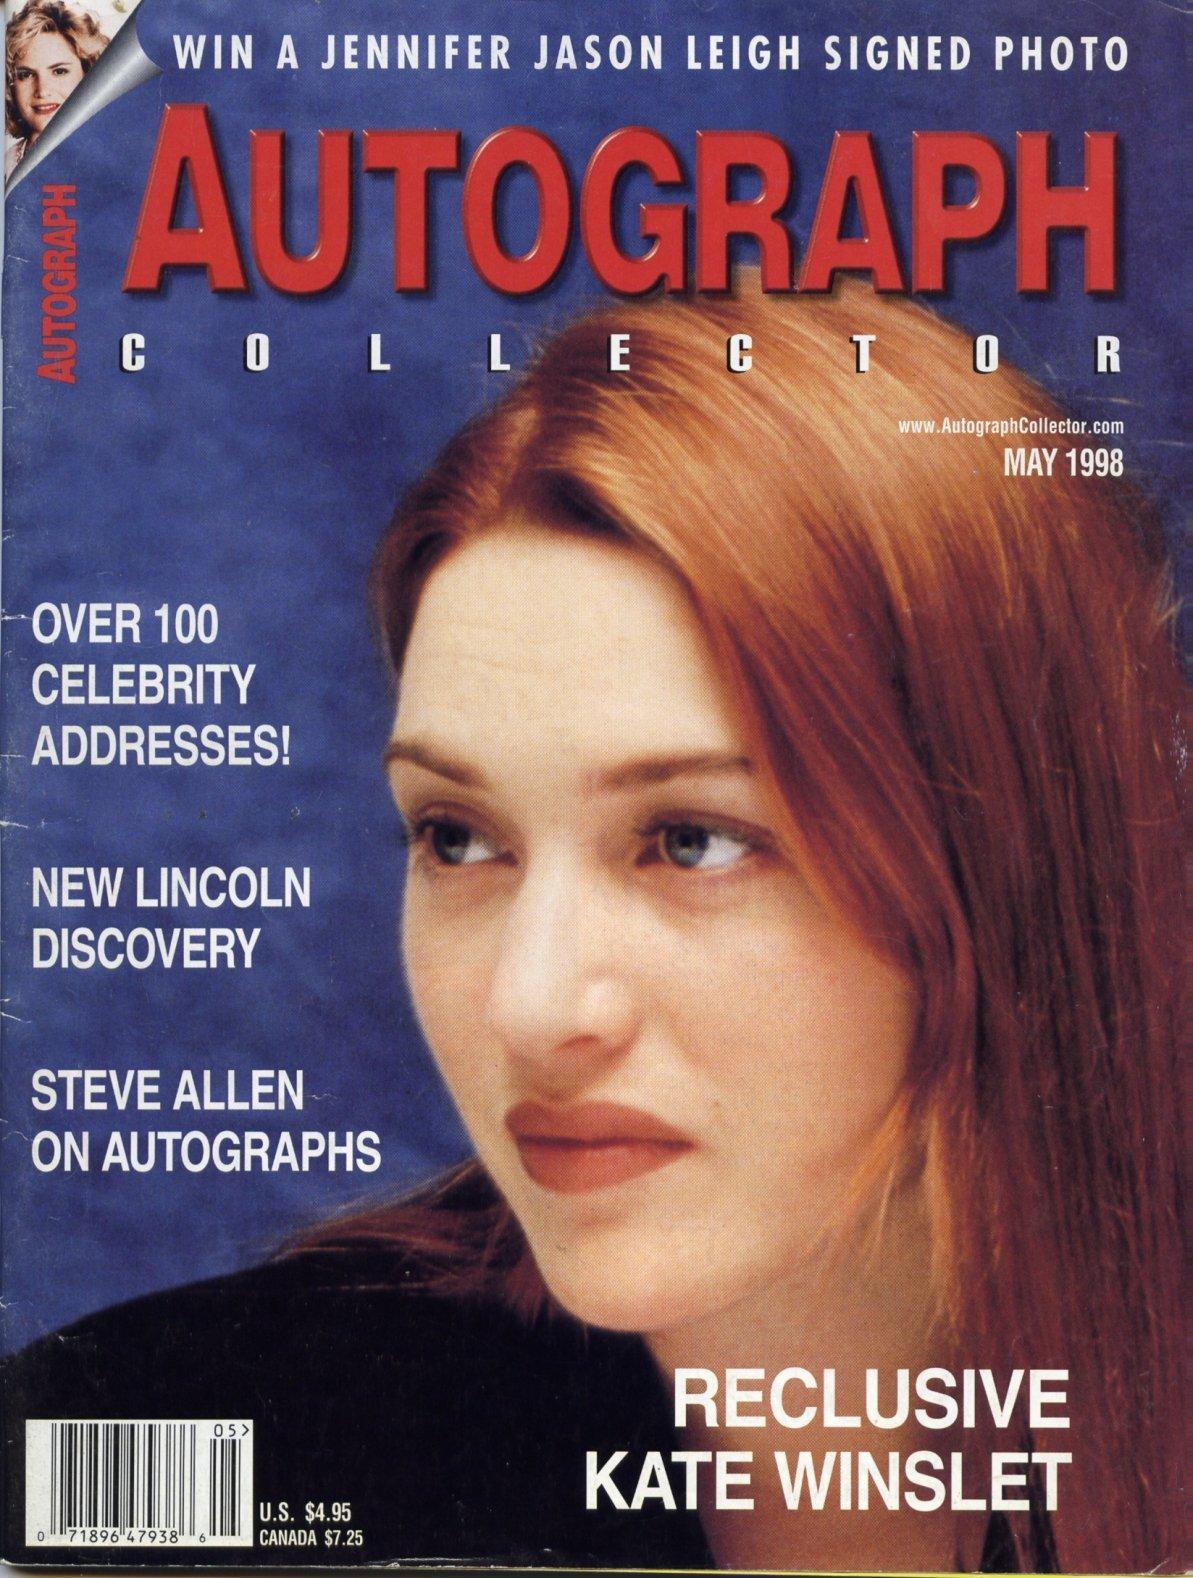 autograph-collector_may-98_001.jpg